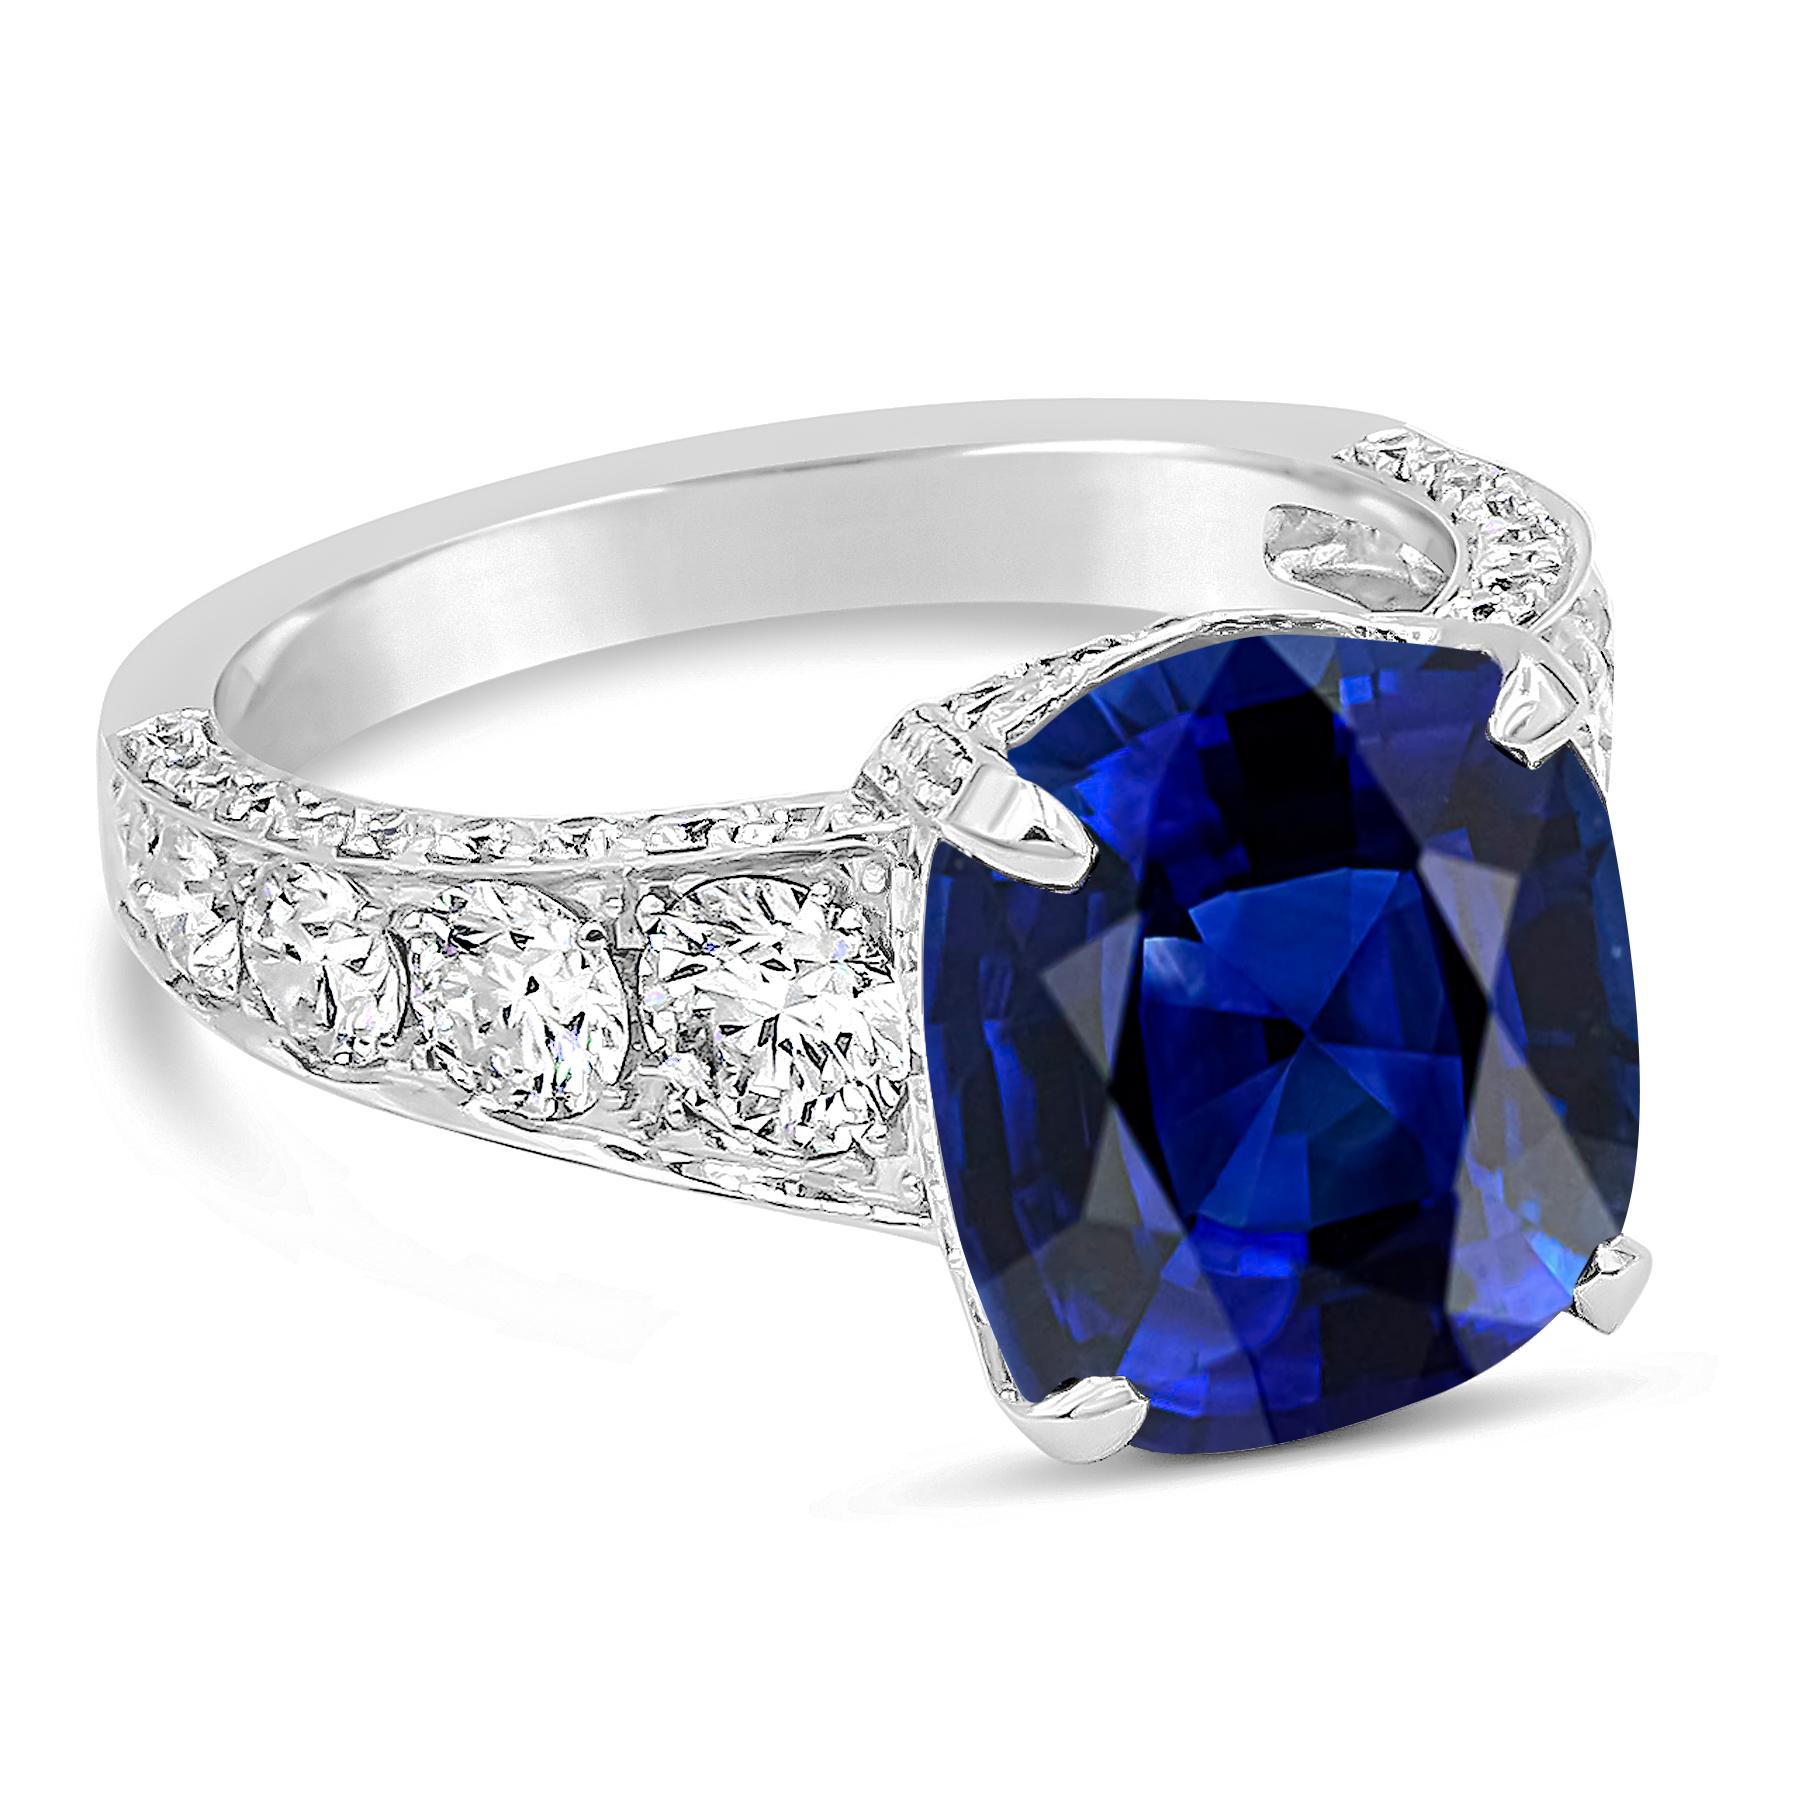 An appealing and exquisite gemstone engagement ring showcasing a GRS Certified Sri Lanka Origin vivid blue sapphire center stone weighing 7.66 carats total, Royal Blue in Color. Accented by graduating brilliant round diamonds set on the crown and